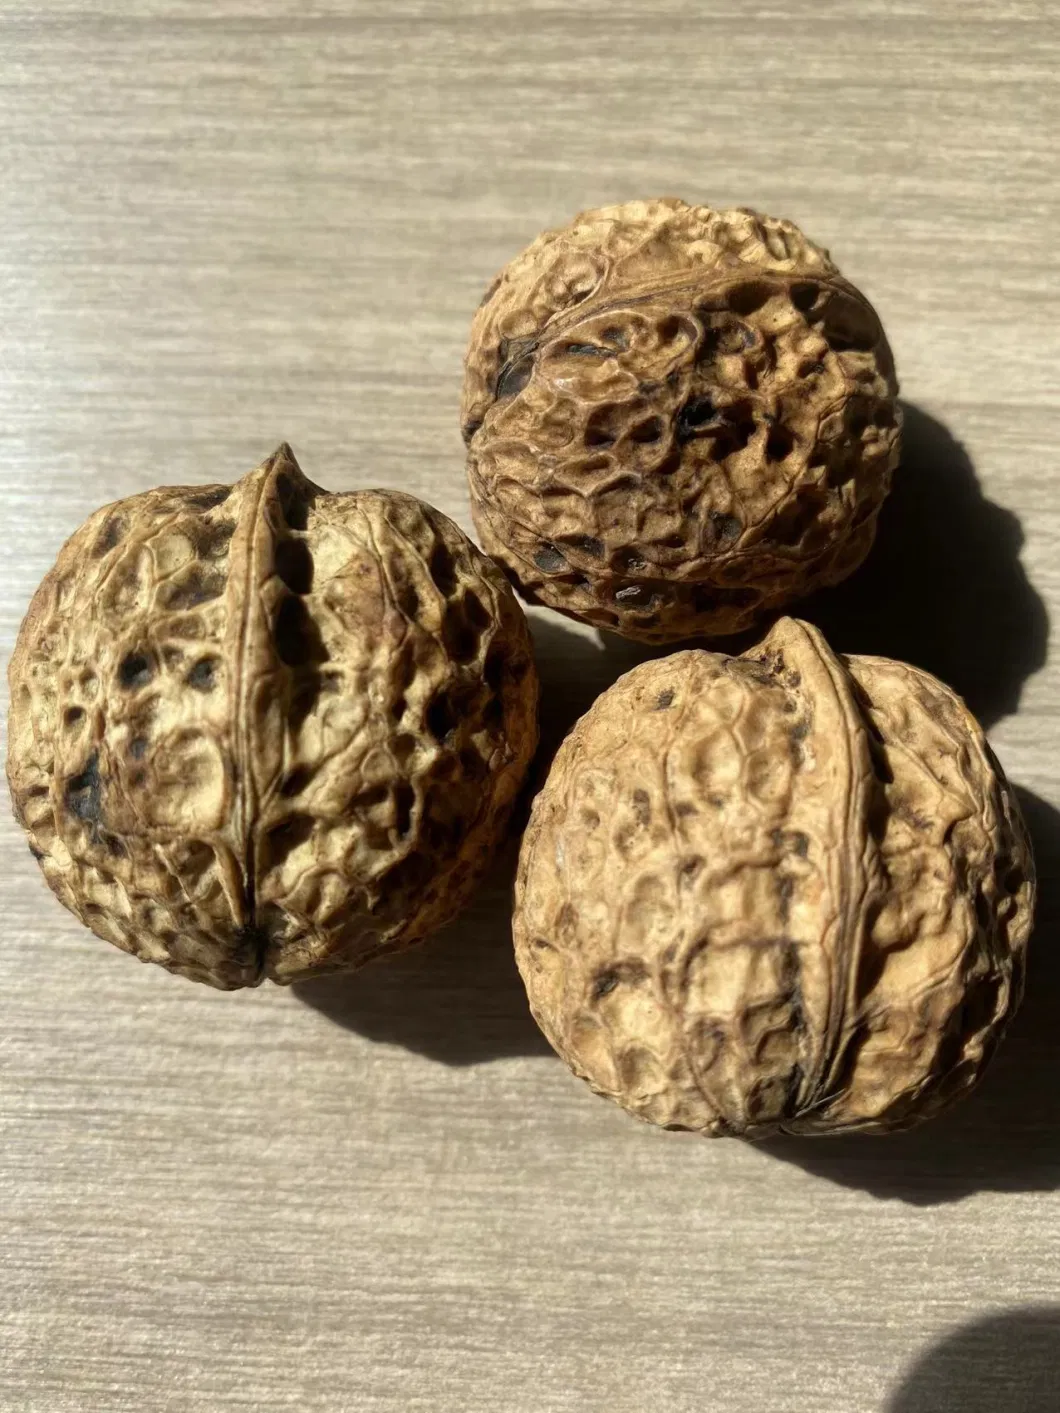 Dried Fruit Nuts Walnuts Meat Great Top Quality Chinese Exporter Shelled Walnut Factory Price